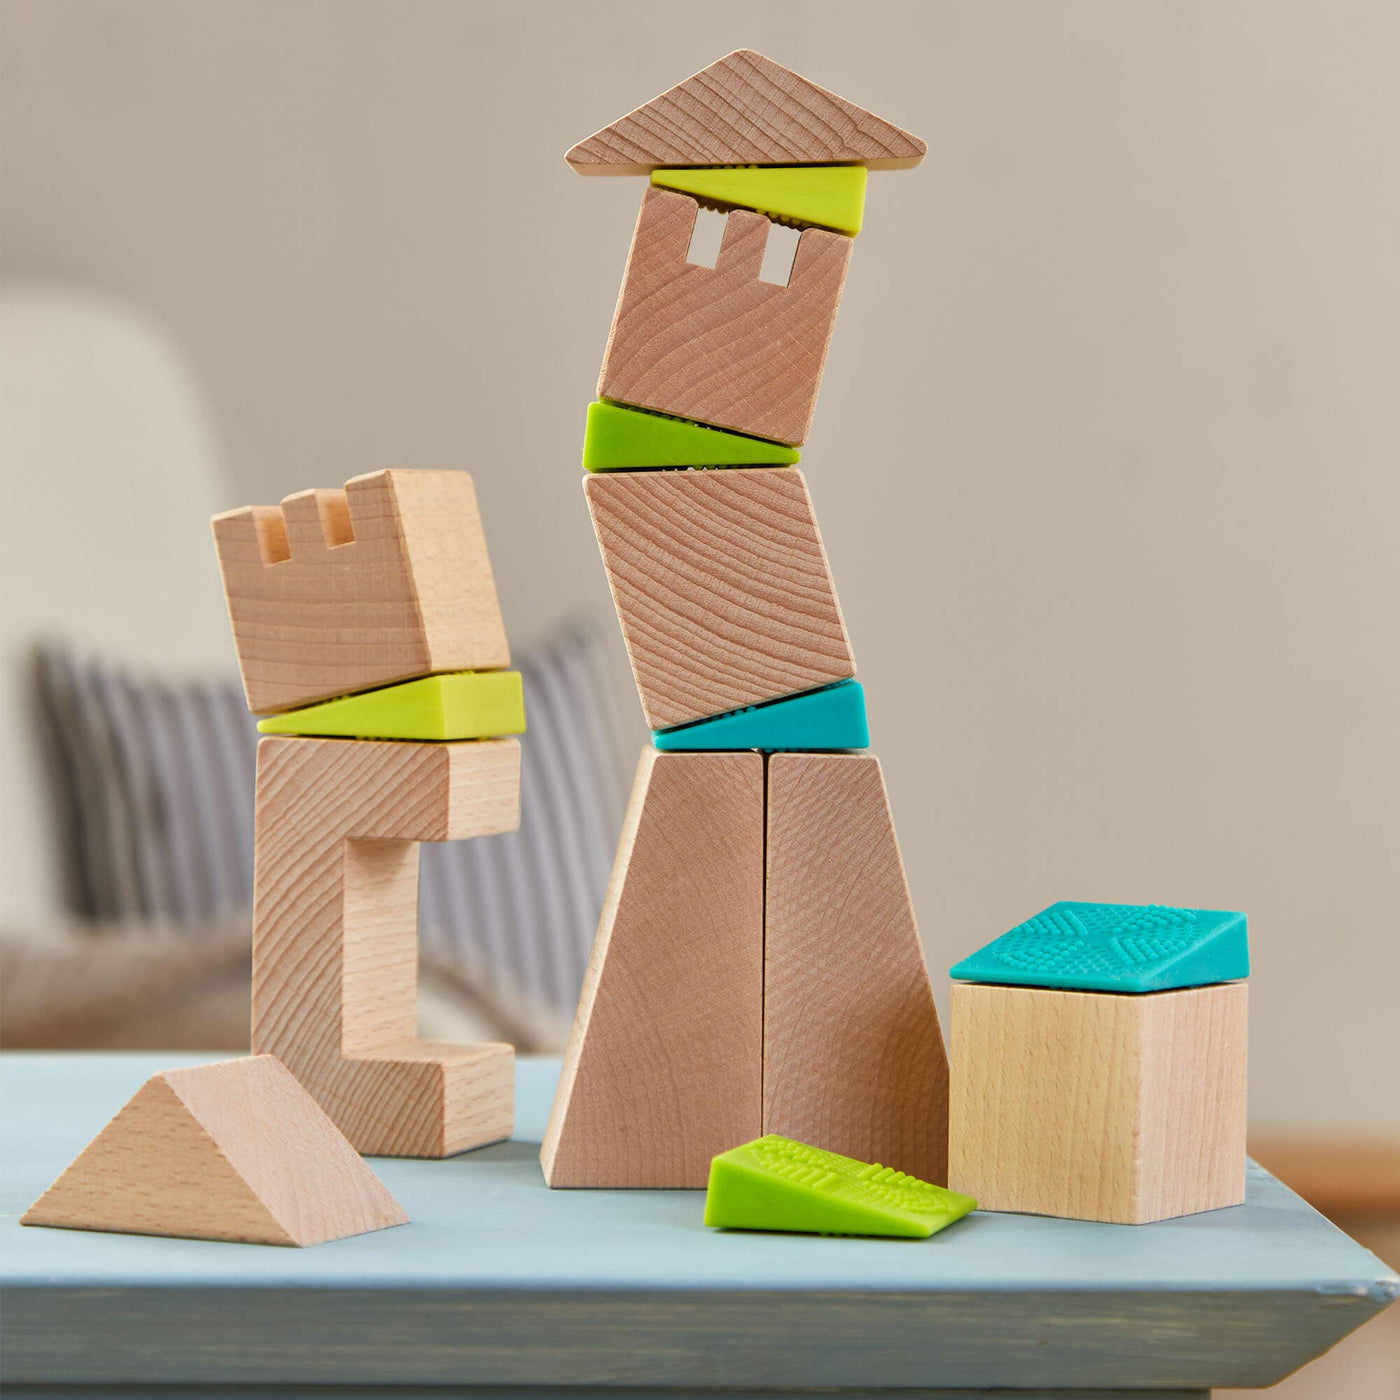 Crooked Tower Wooden Blocks - HABA USA wooden block tower on wooden table